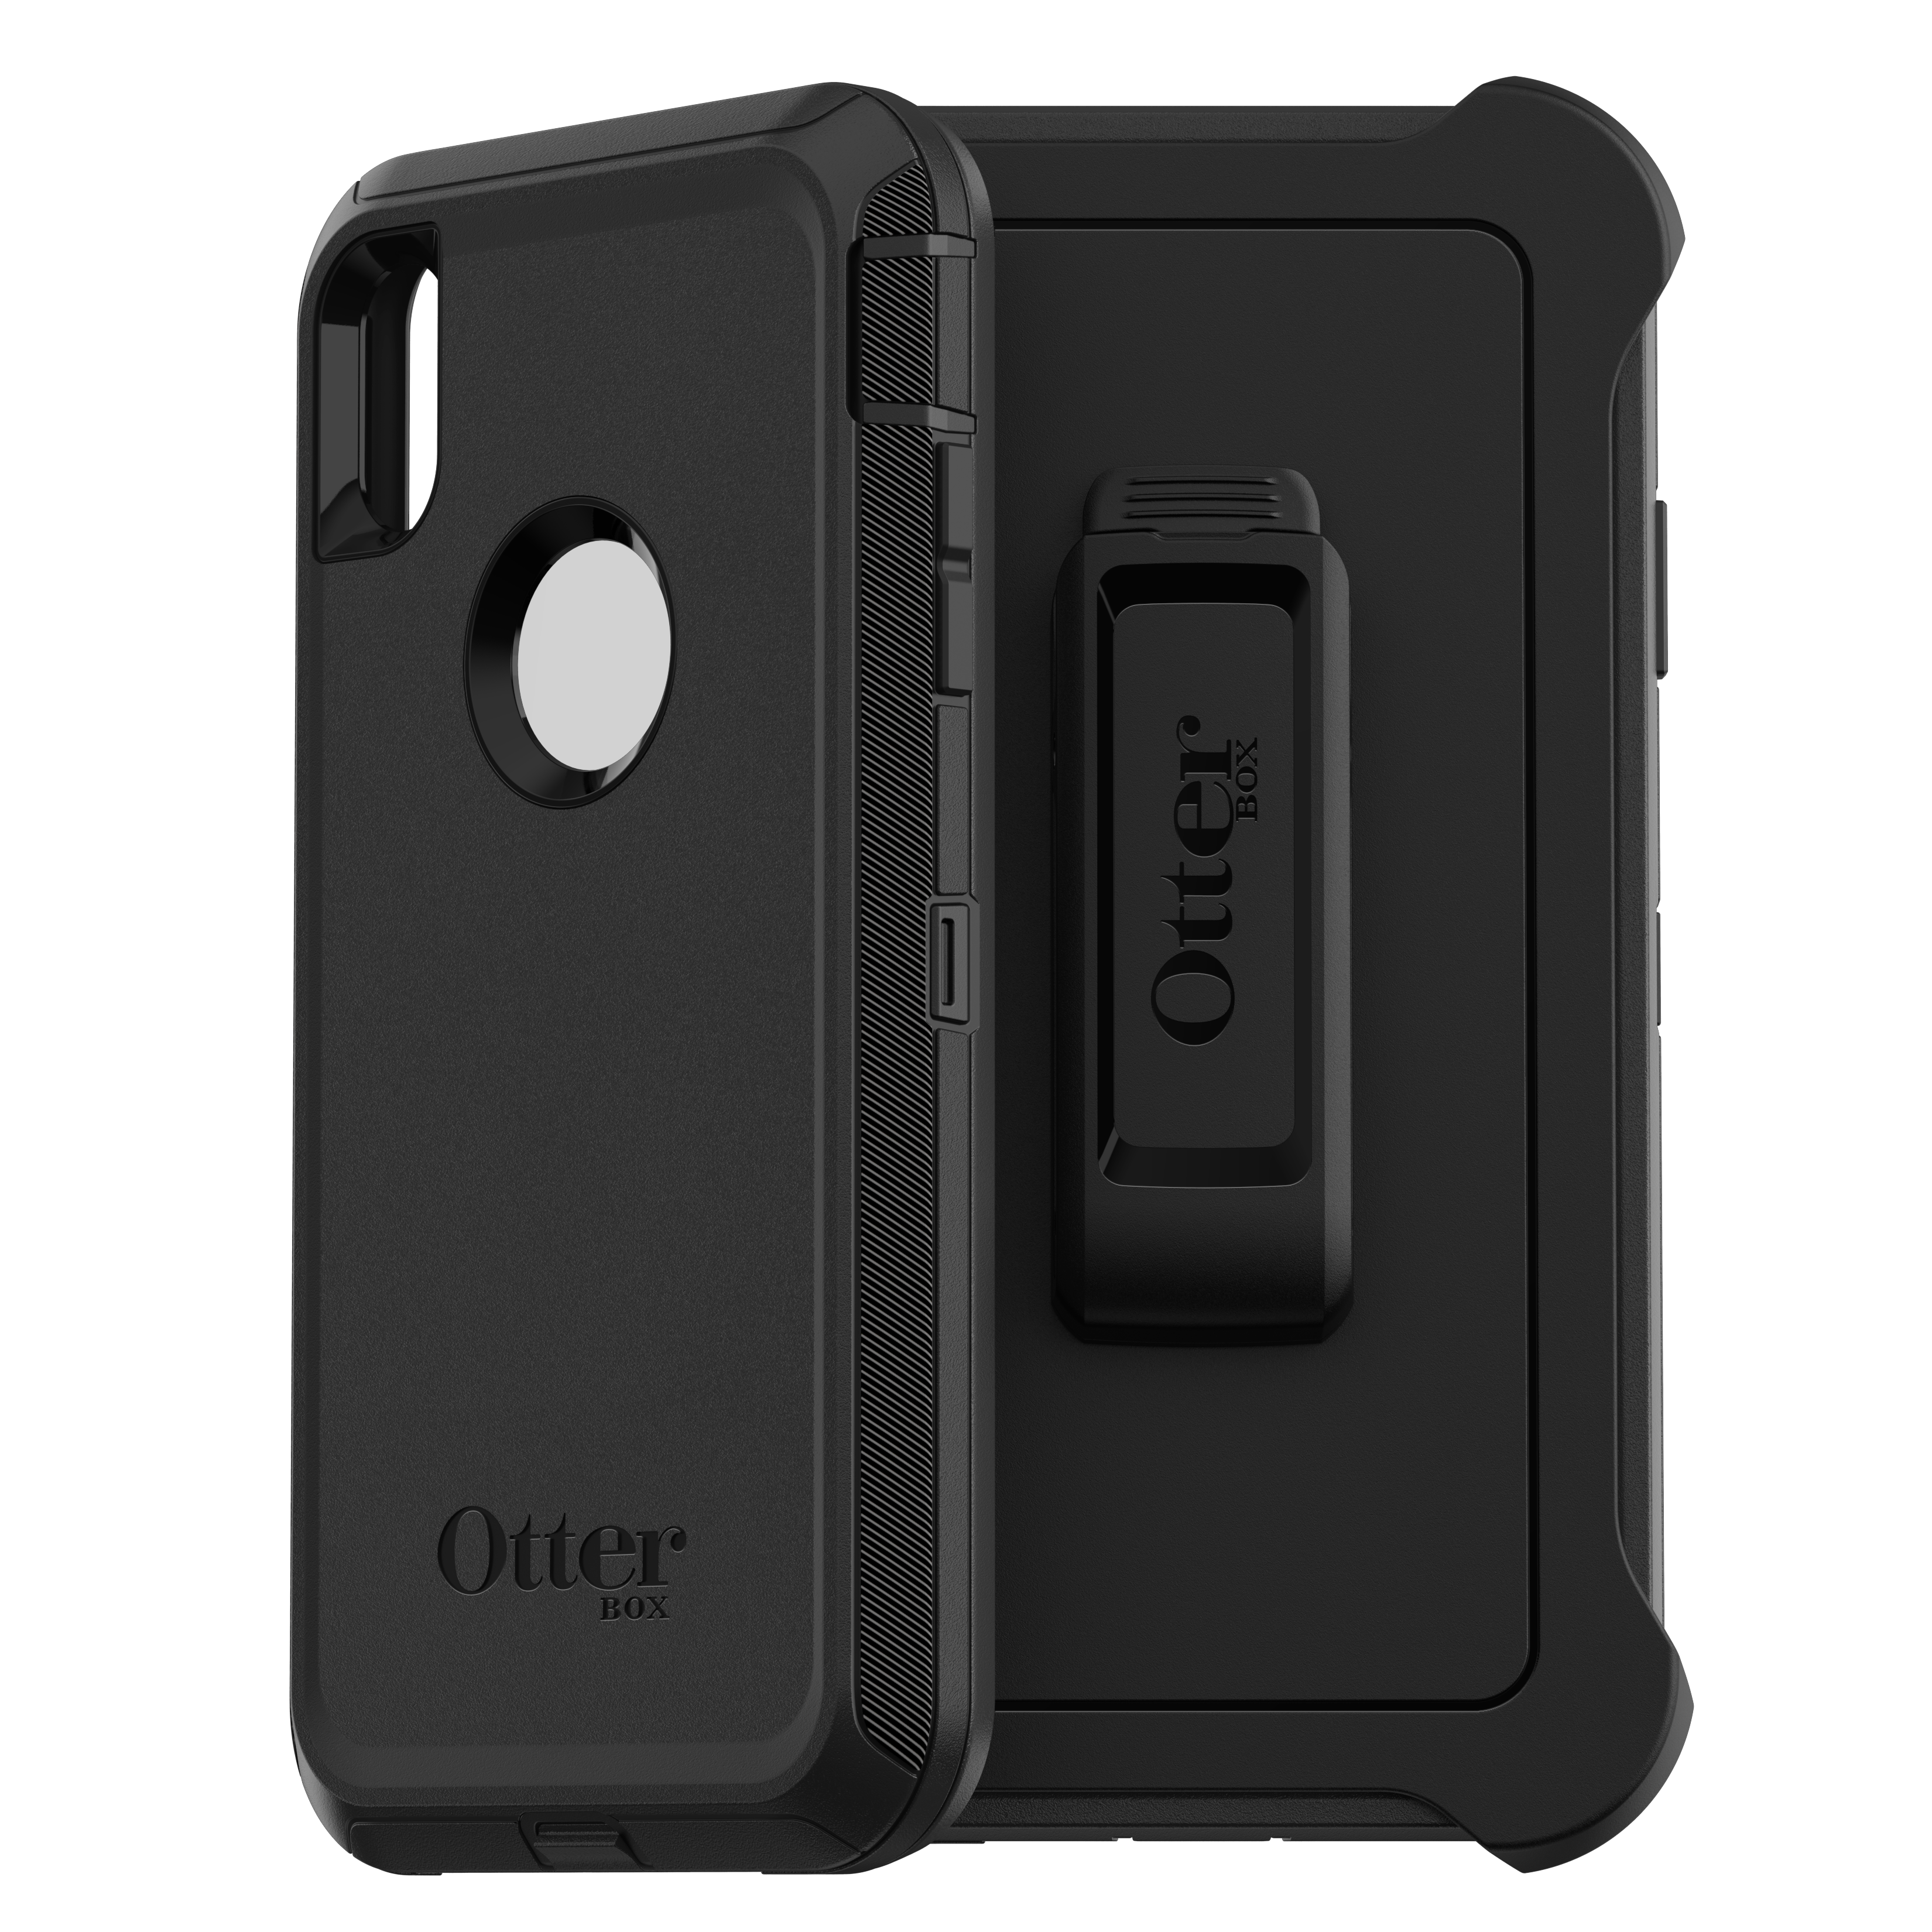 OtterBox Cases For iPhone XS/XS Max « Blog  lesterchan.net